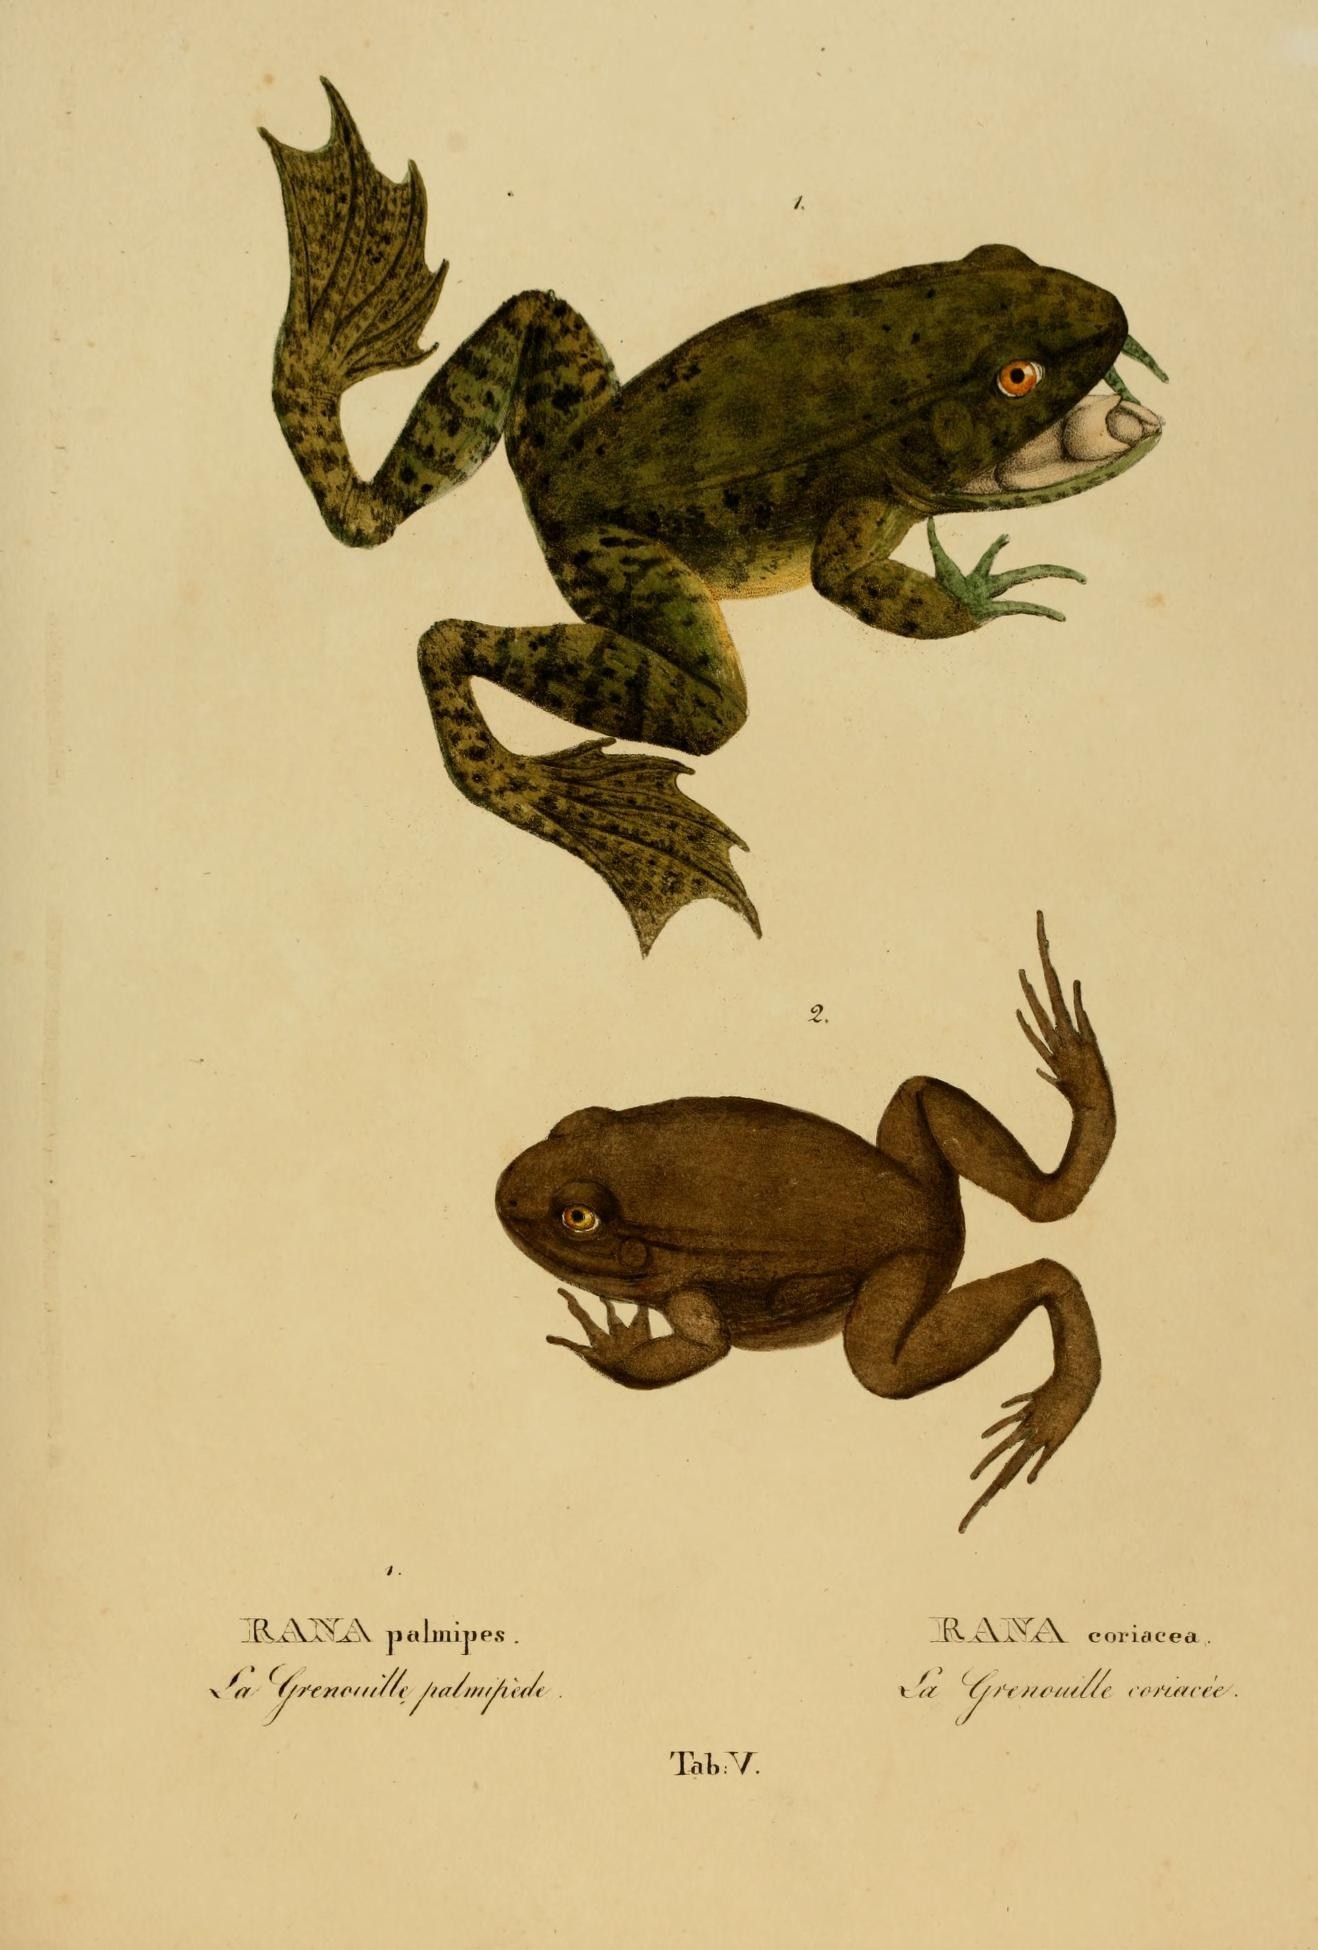 a frog and a toad from the book of the lizards,